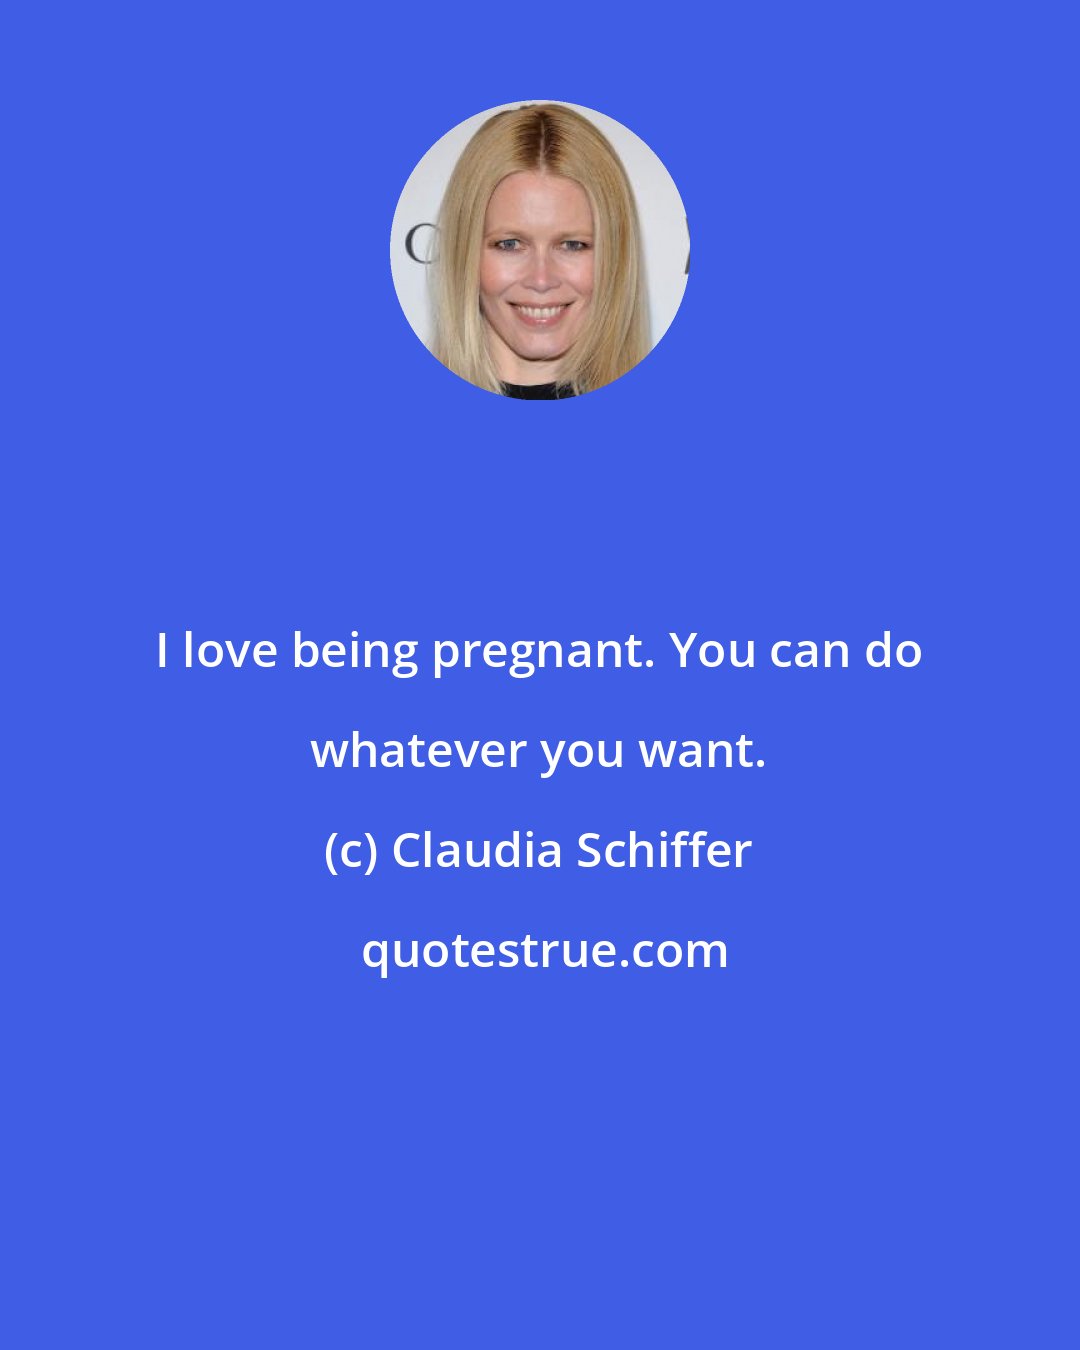 Claudia Schiffer: I love being pregnant. You can do whatever you want.